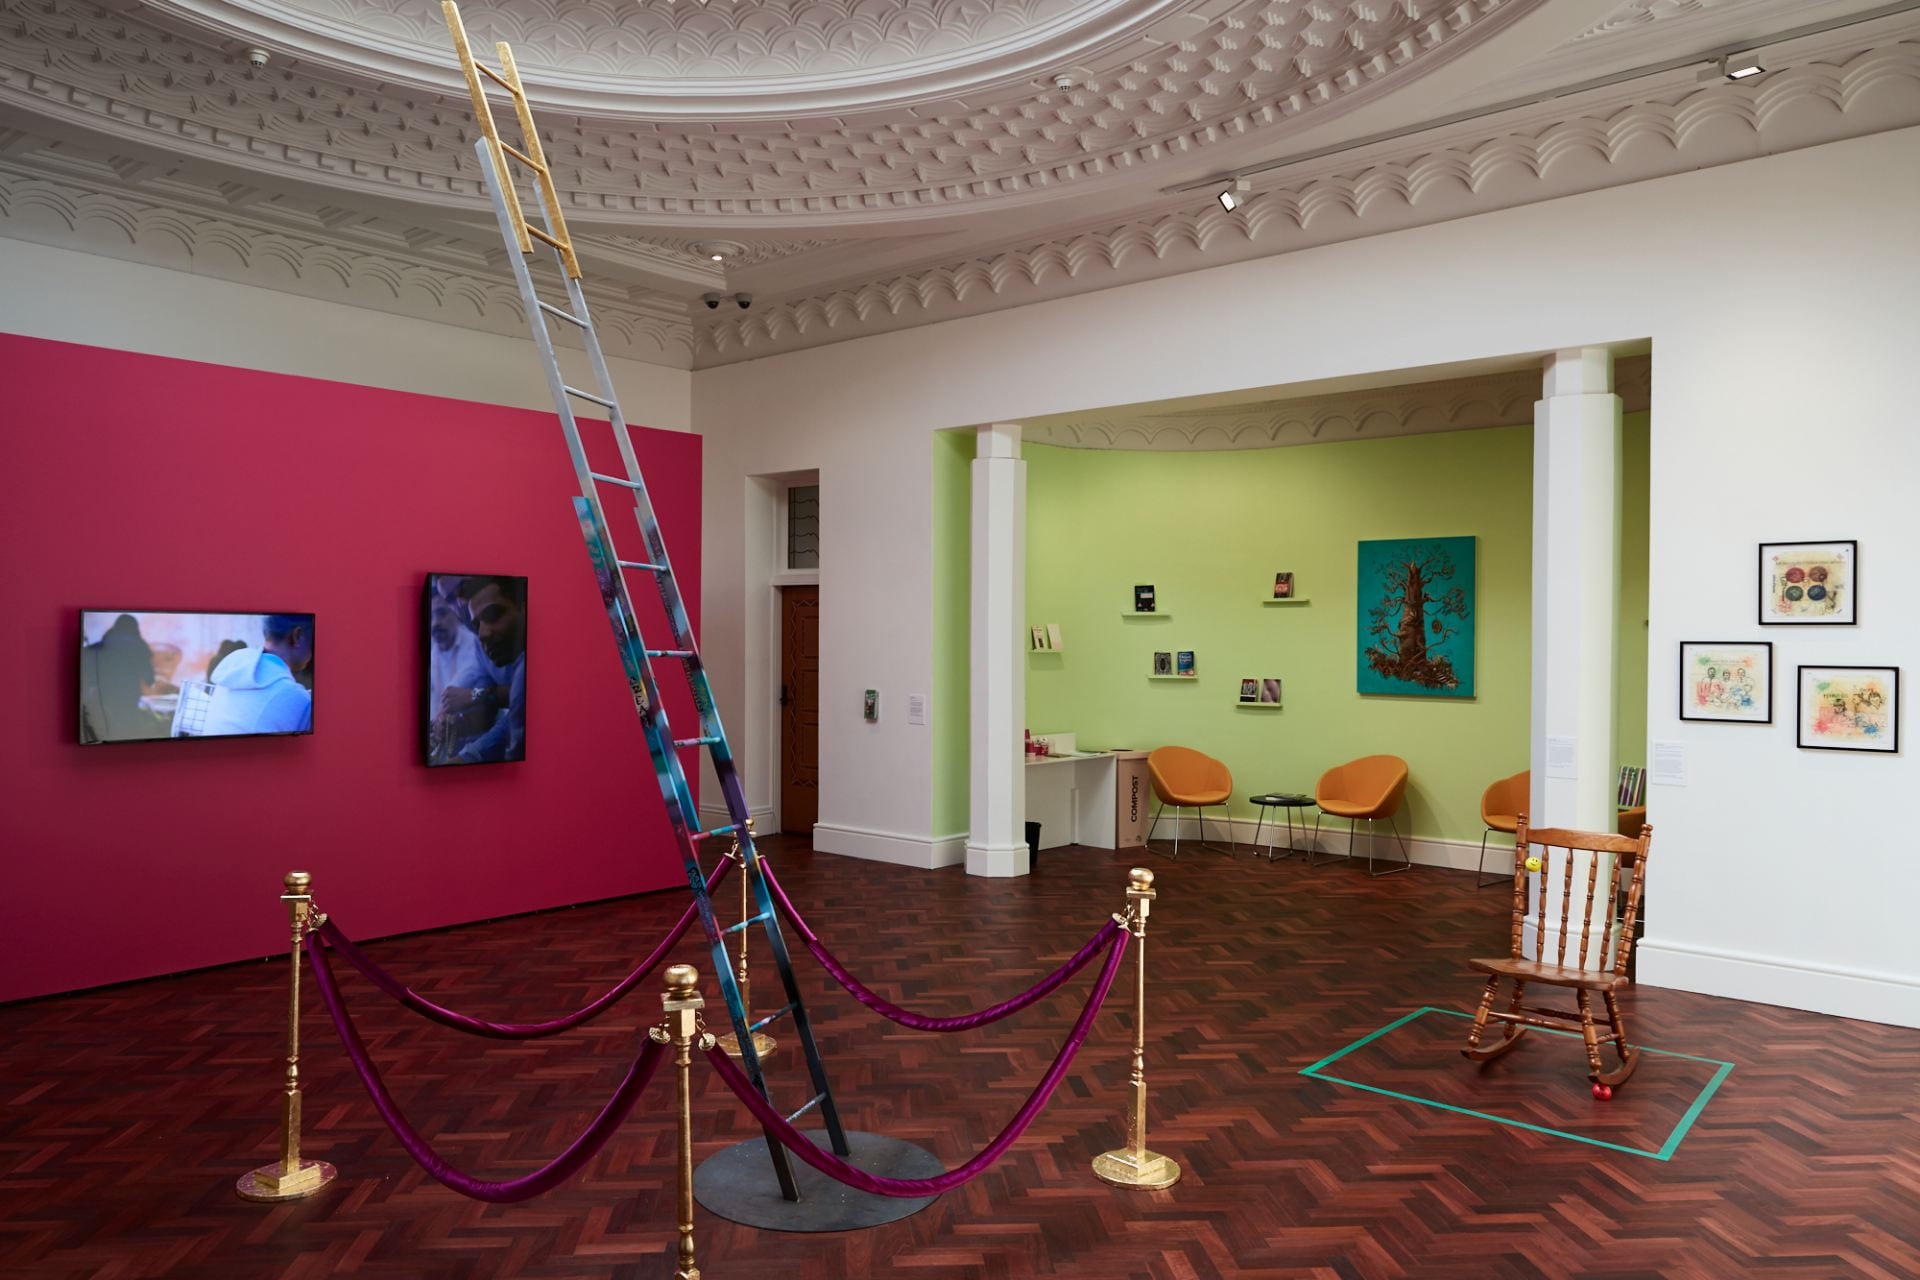 A gallery space with an elaborate dome ceiling and wooden floor. A hot pink wall in the background has two televisions hung on it. In the foreground, a ladder decorated with graffiti and gilded at the top stretches towards the ceiling, surrounded by gold bollards with velvet pink ropes.